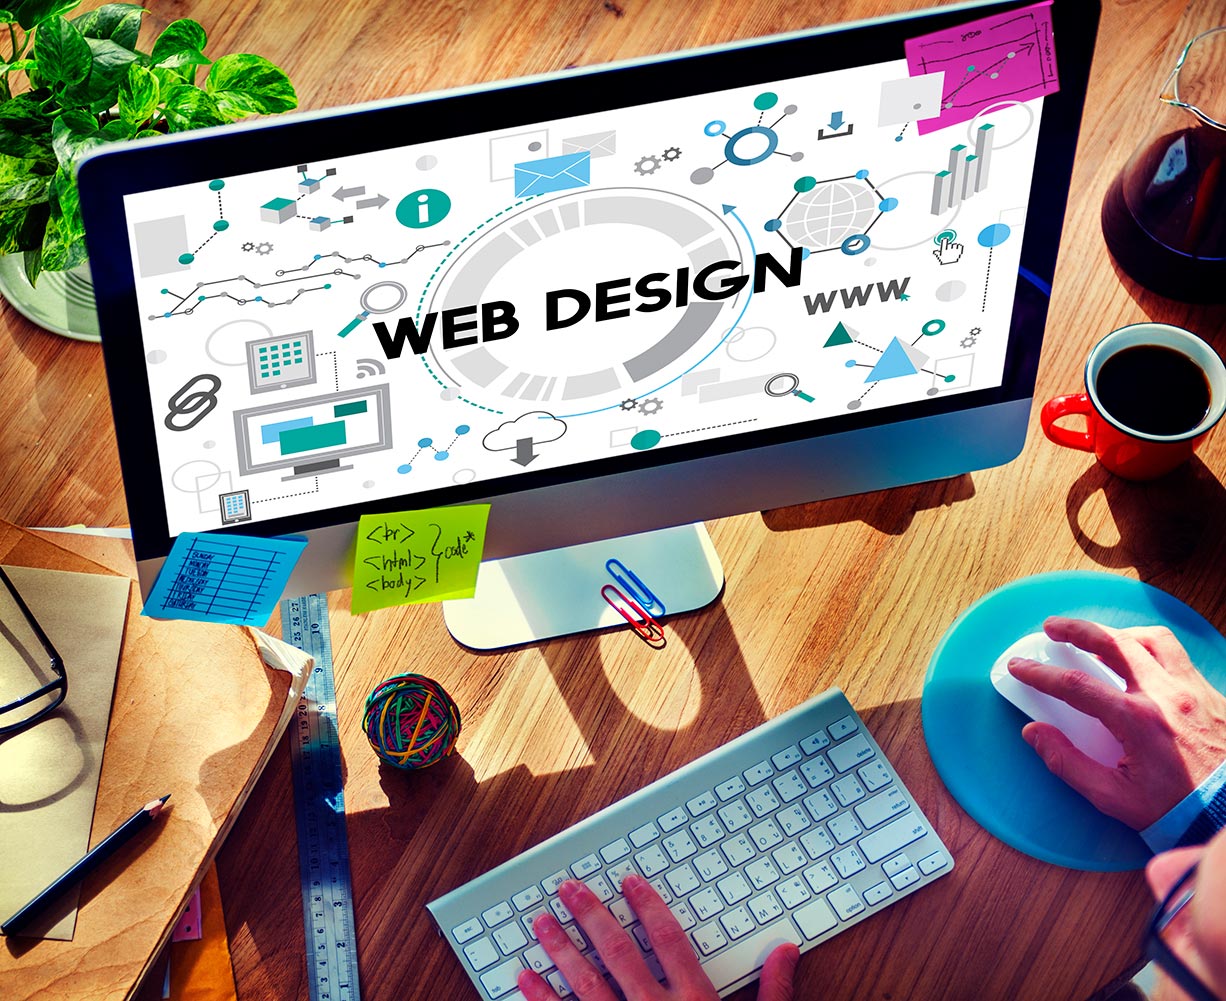 What Makes a Website Design Engaging and Intuitive?